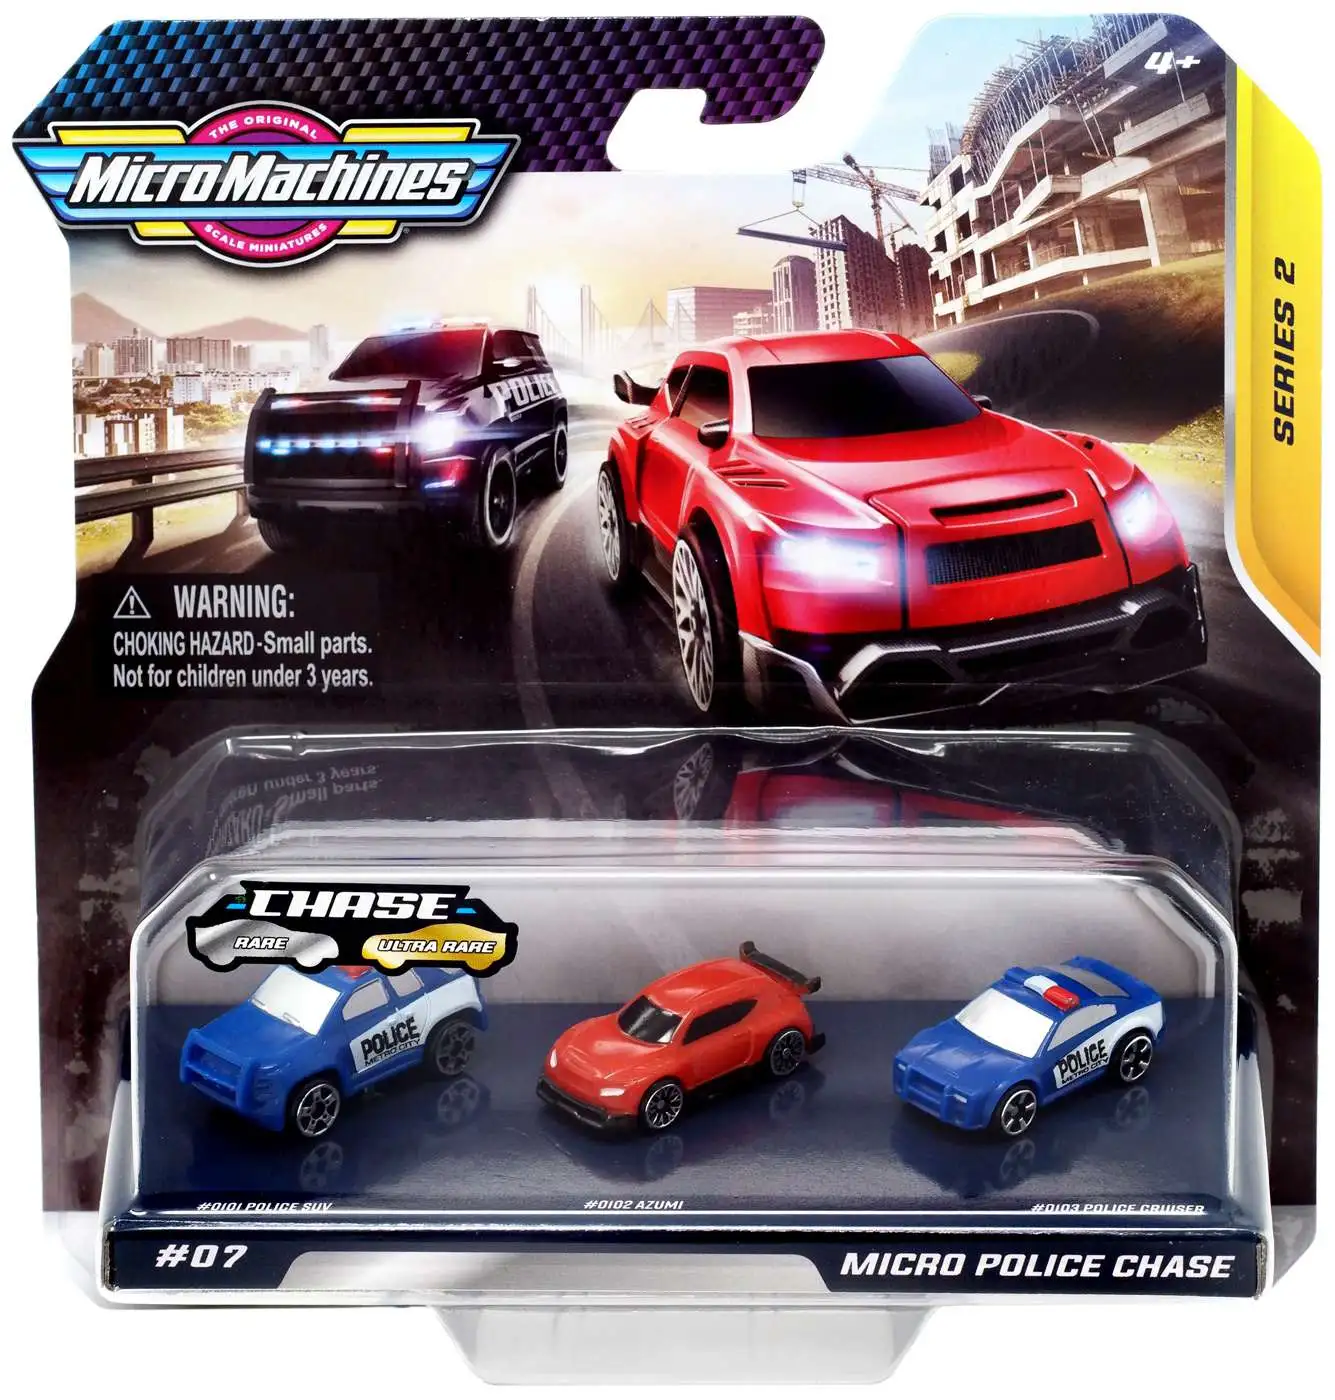 Micro Machines Starter Pack Chance of Rare Police Chase Includes 3 Vehicles Police & Race Cars Toy Car Collection 